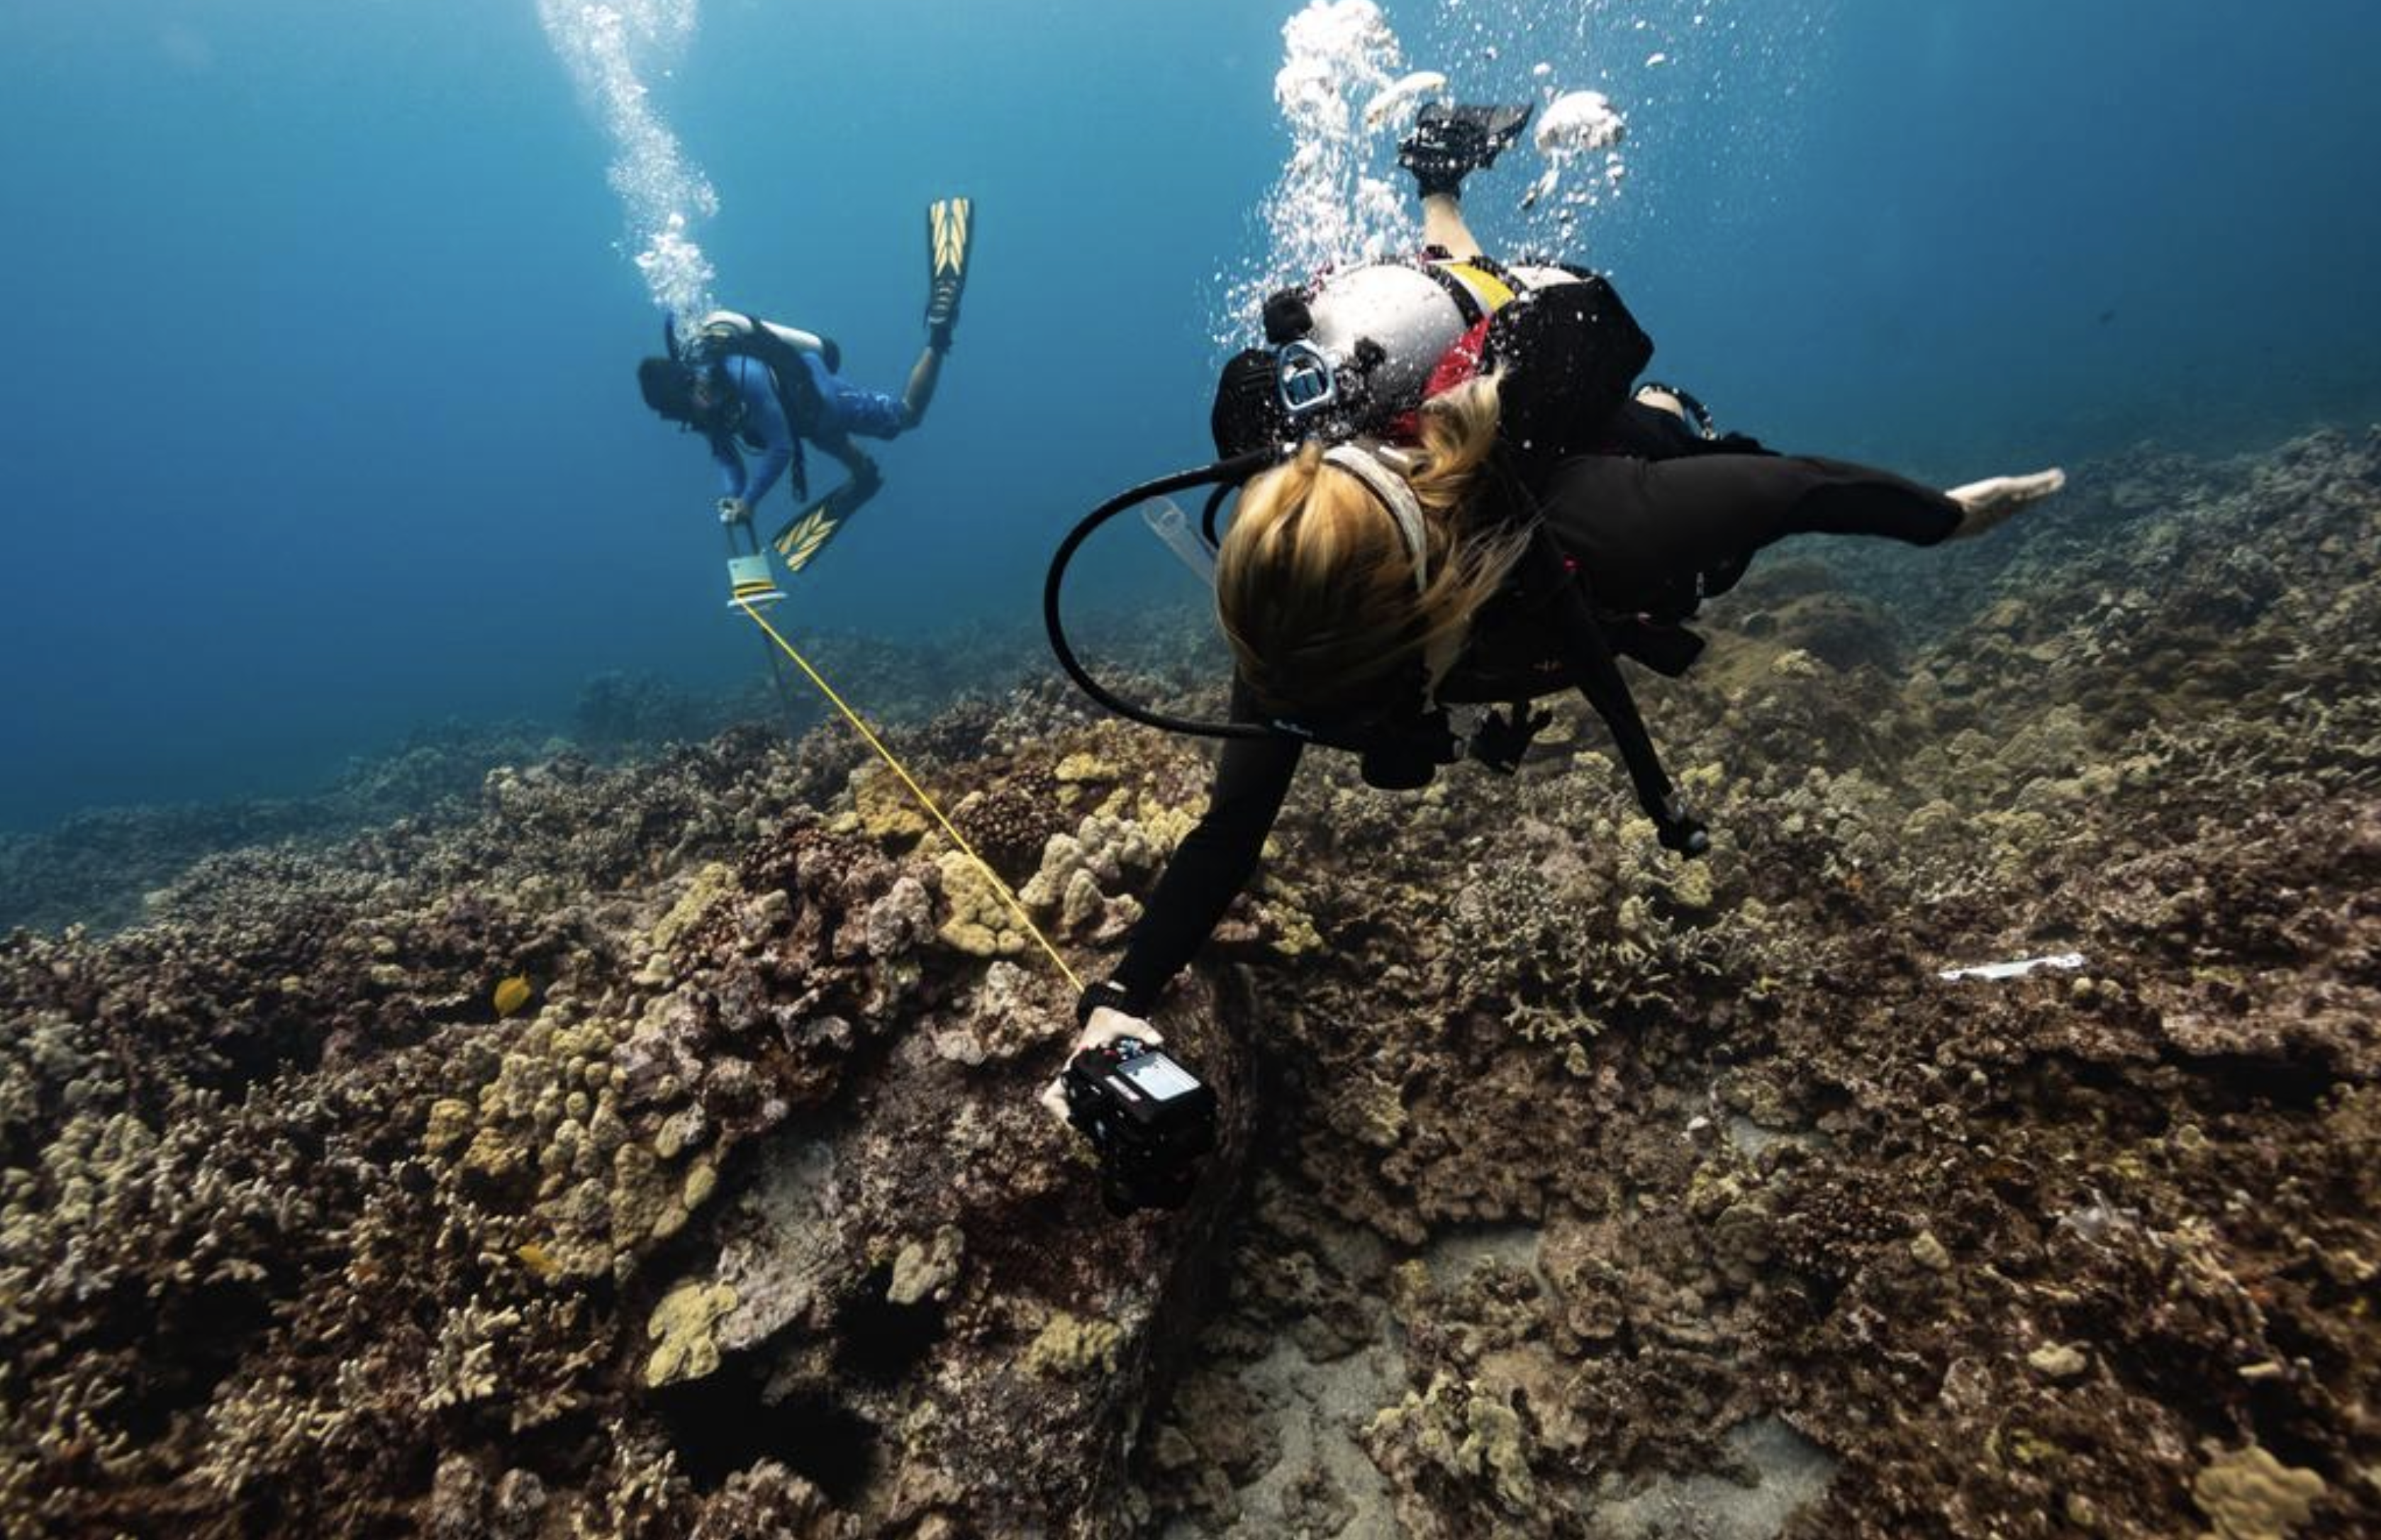 ASU scientists map the Hawaii's coral reefs during a bleaching event